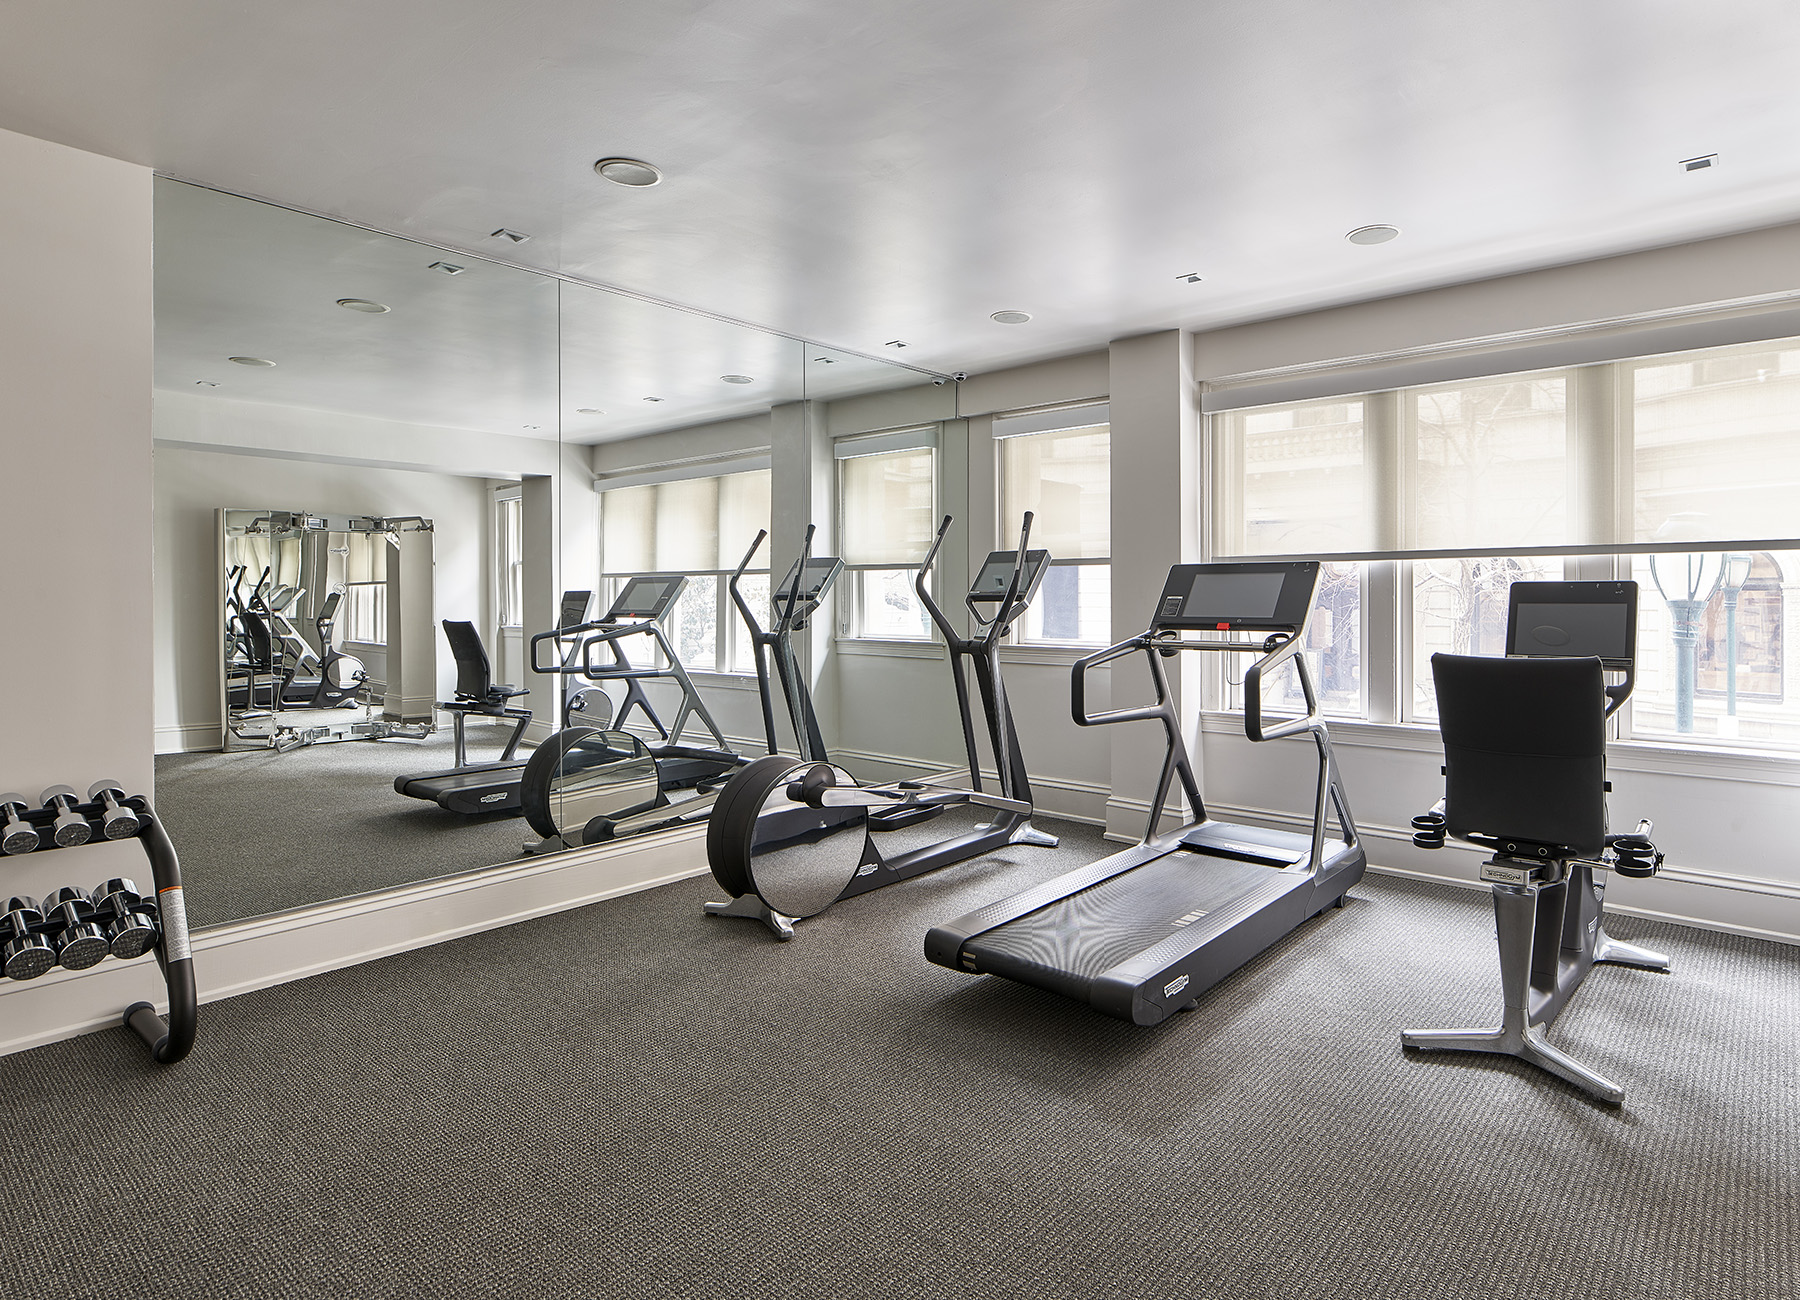 Fitness center with state-of-the-art cardio equipment